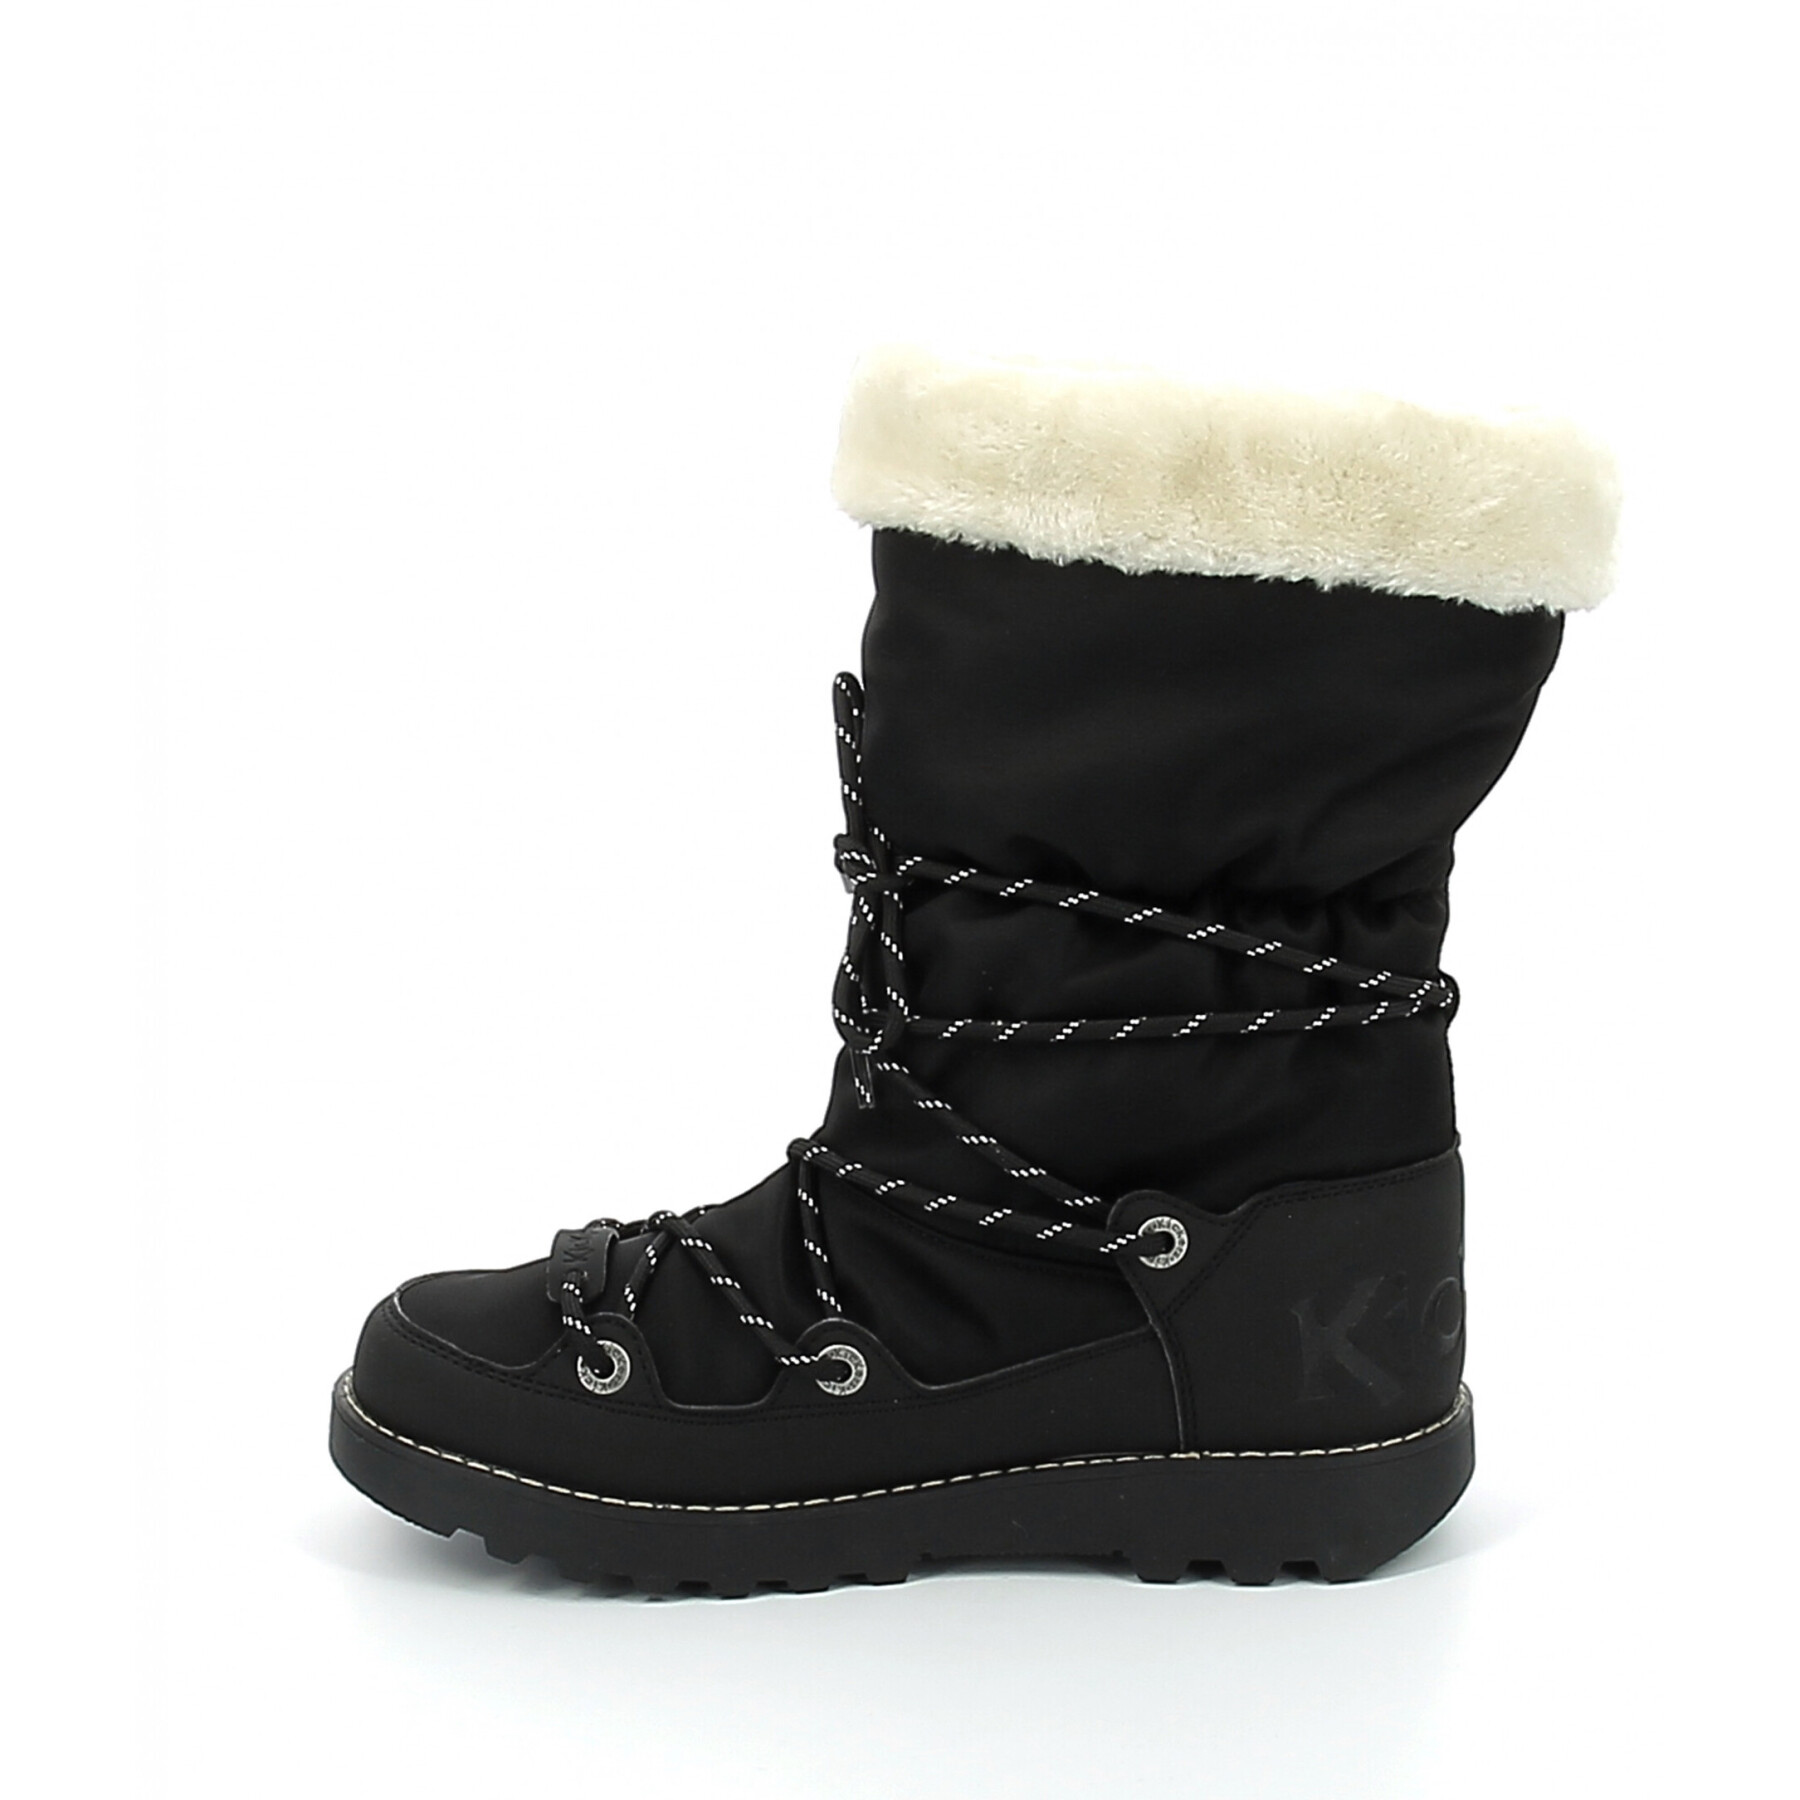 Women's leather boots Kickers Neosnow